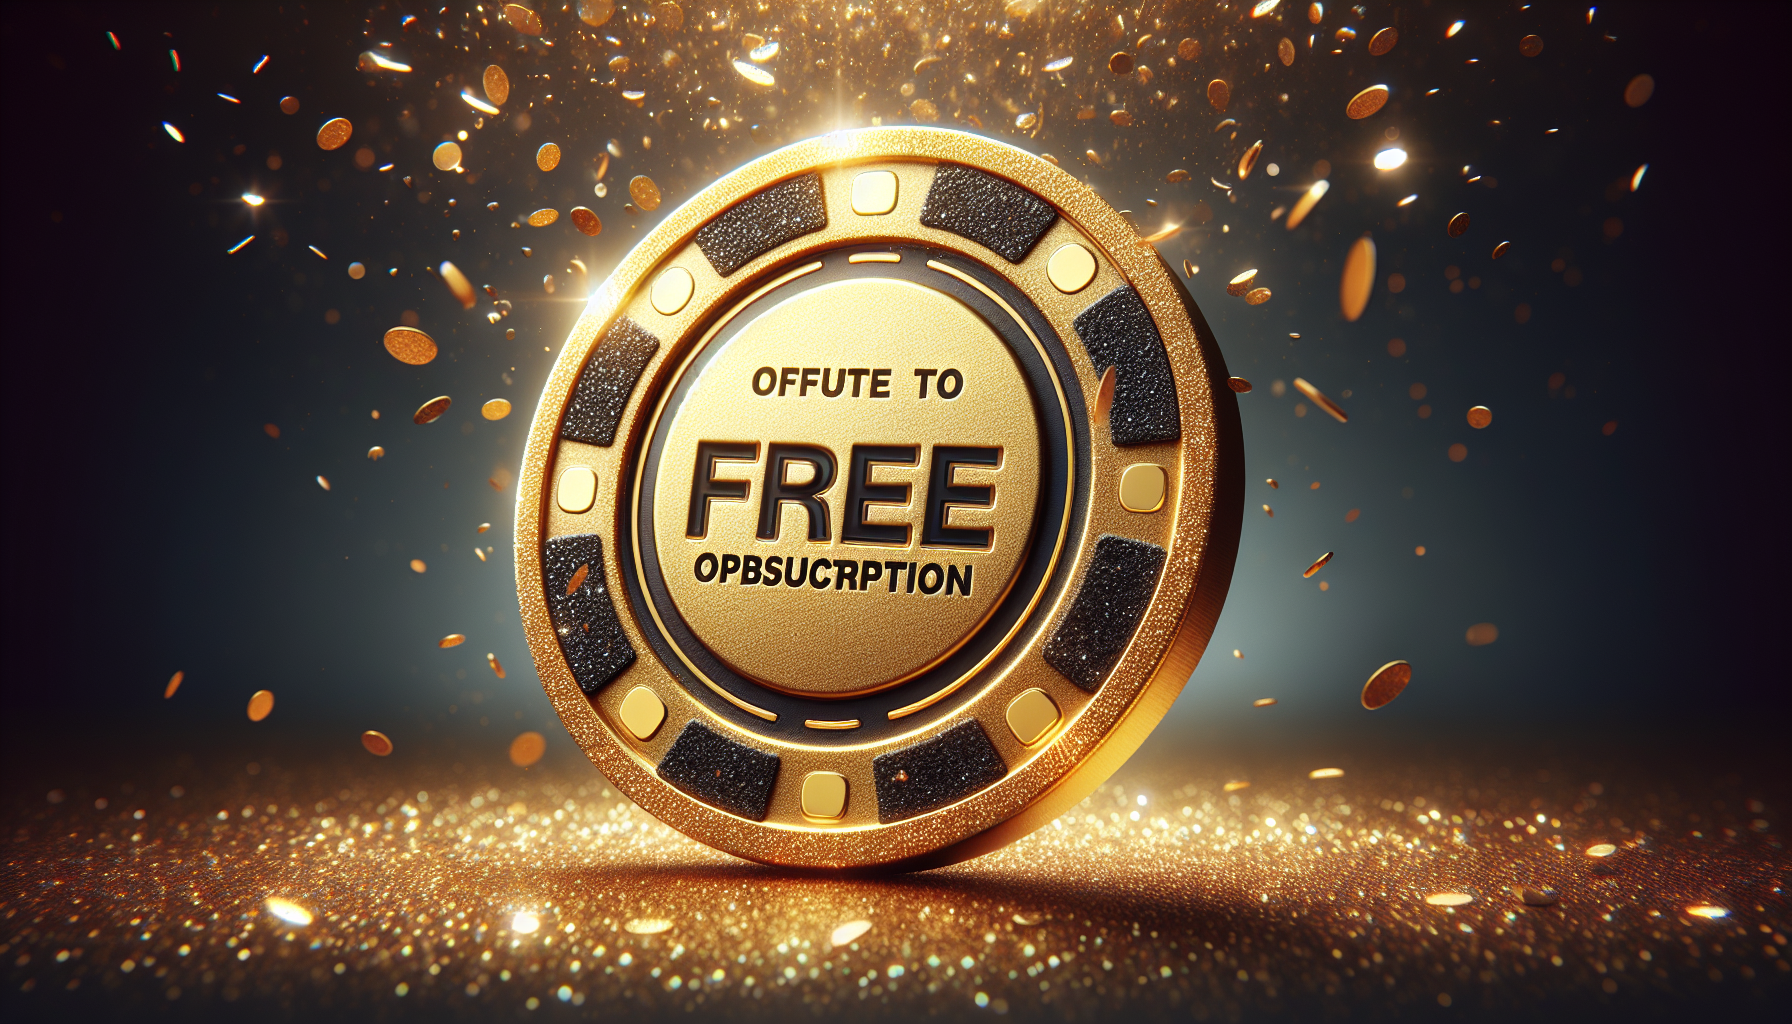 What Casino Gives Free Play For Signing Up?